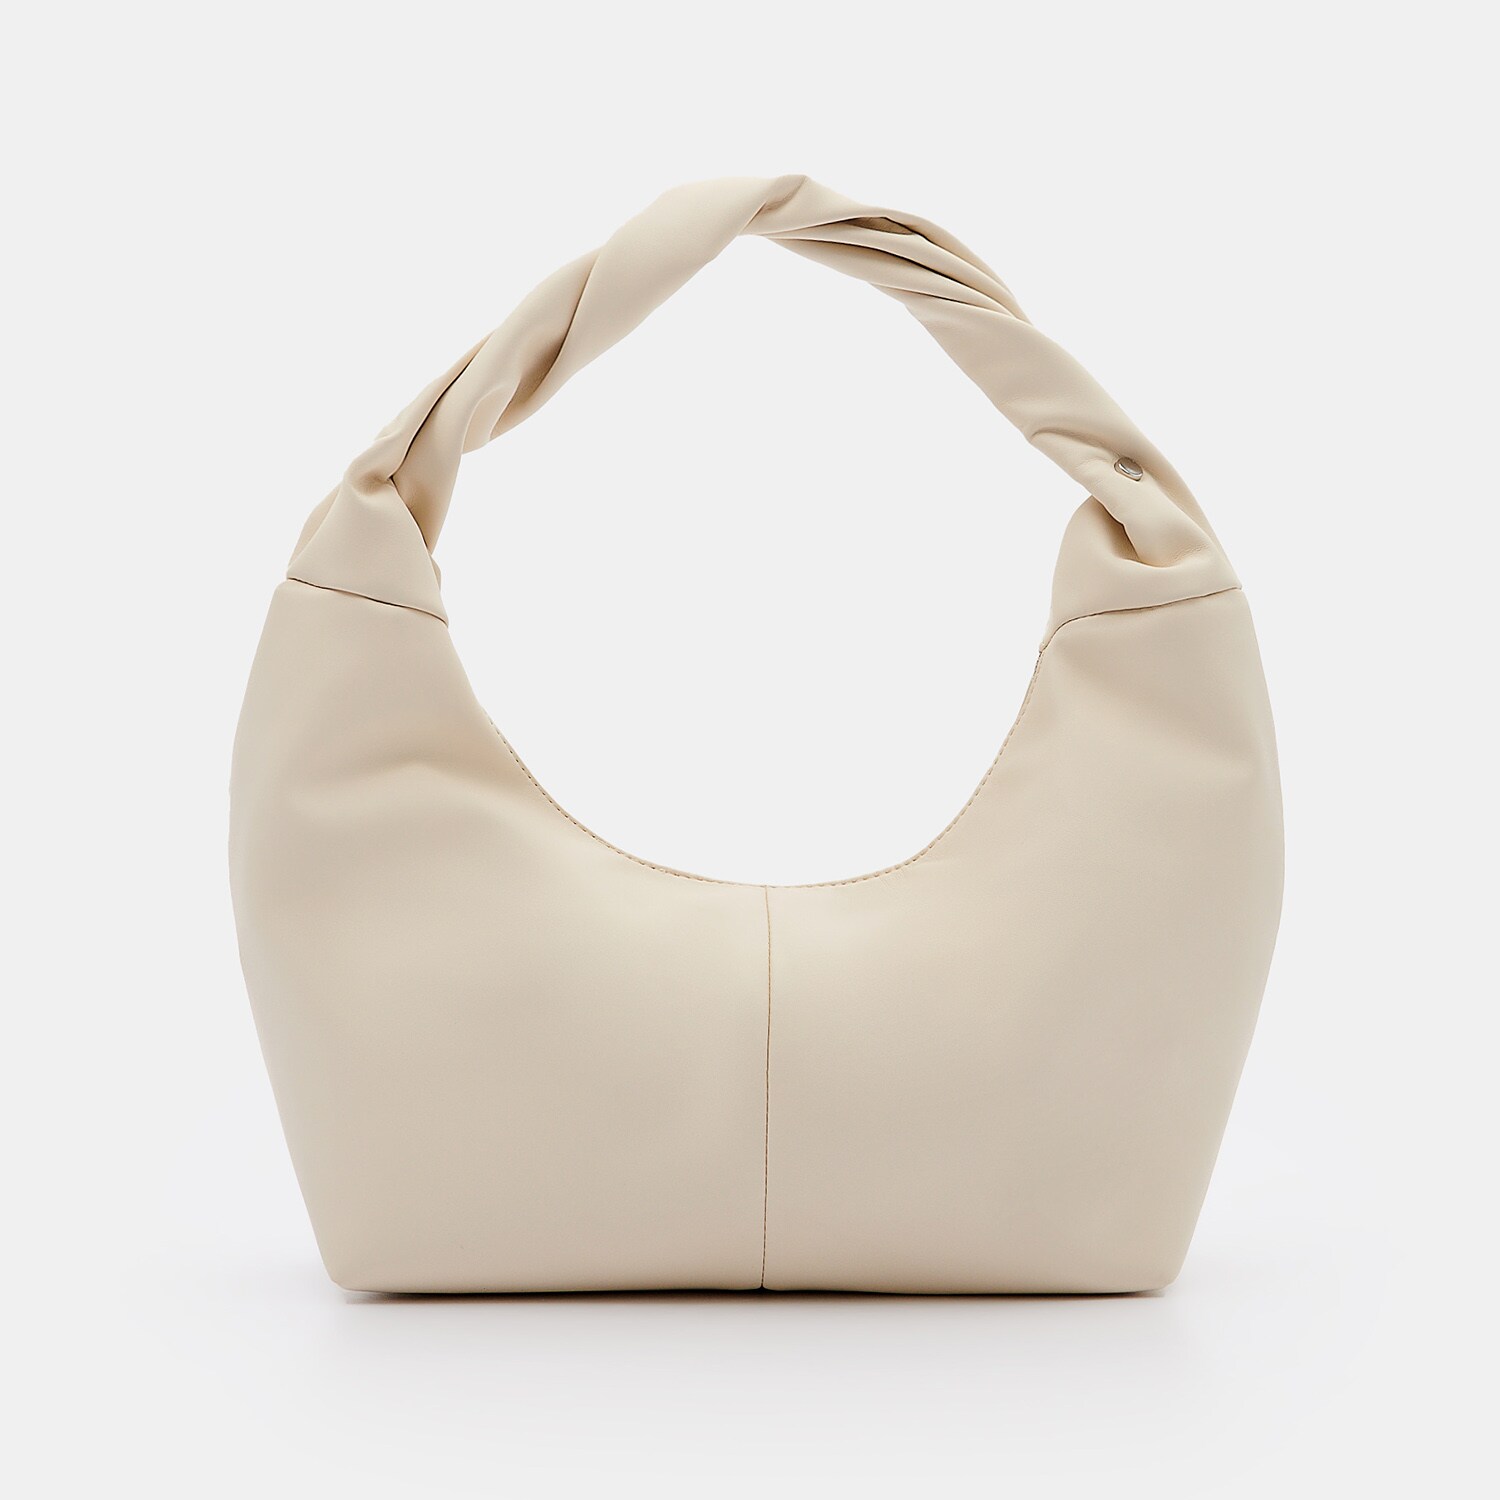 Mohito – Geantă tip baghetă – Ivory Accessories > bags 2023-09-24